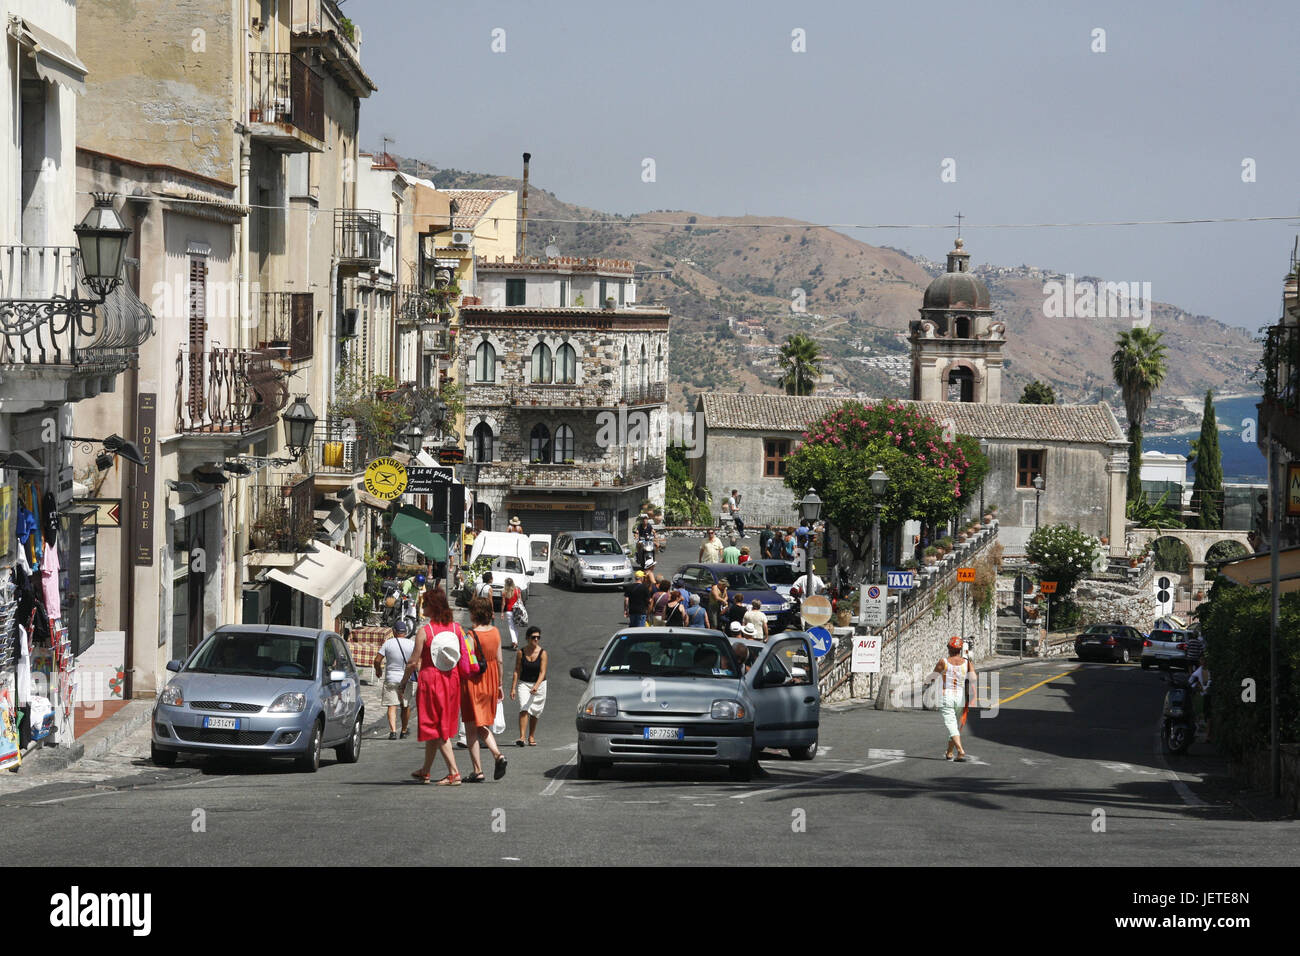 Italy, Sicily, Taormina, Old Town, street scene, Southern Europe, town, street, traffic, vehicles, cars, pedestrians, people, tourists, church San Pancrazio, place of interest, destination, tourism, Stock Photo